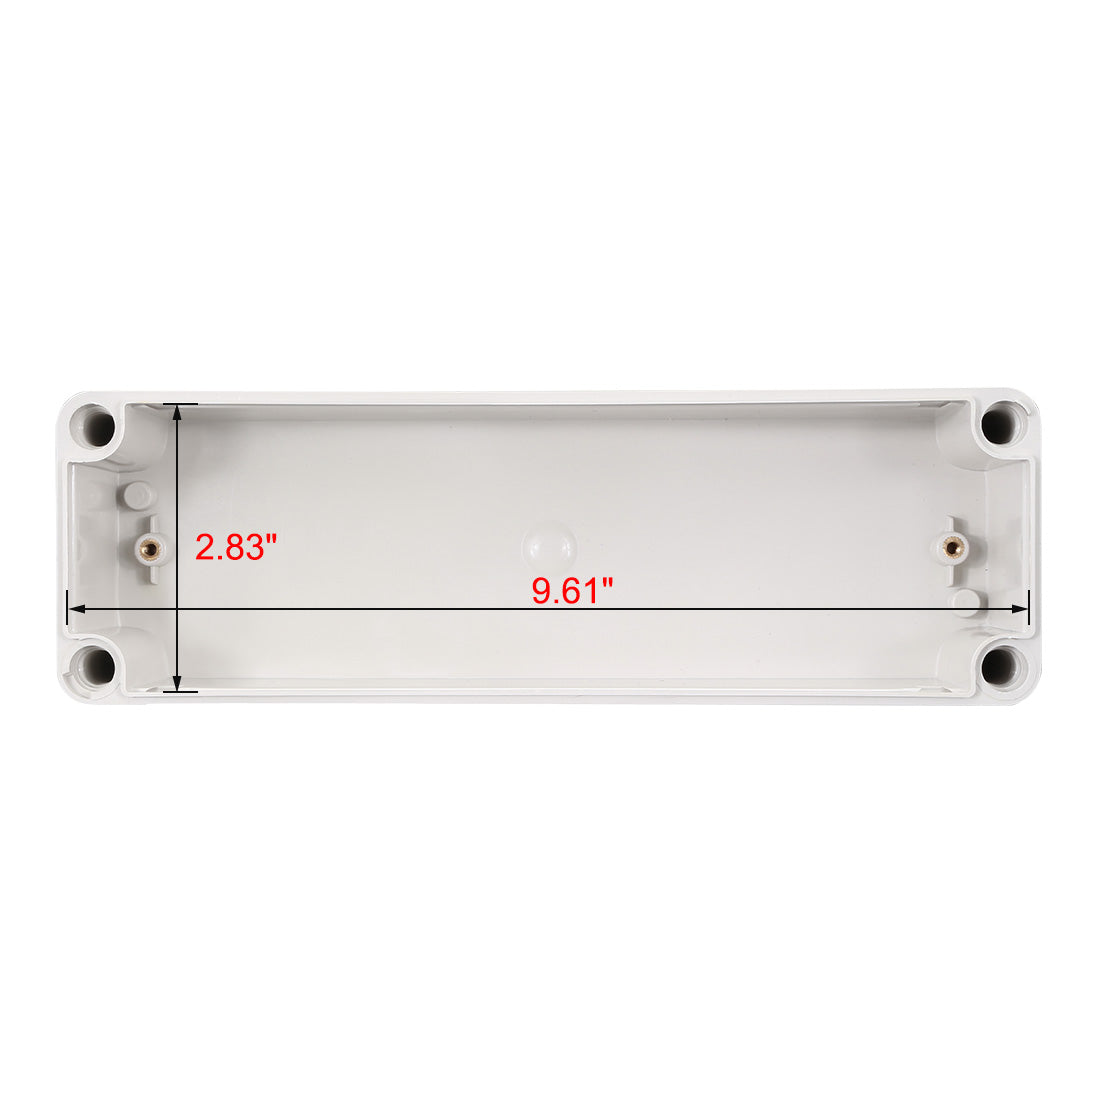 uxcell Uxcell 3.15"*9.84"*2.56" (80mm x 250mm x 65mm) Electronic ABS Plastic DIY Junction Box Enclosure Case Gray IP66